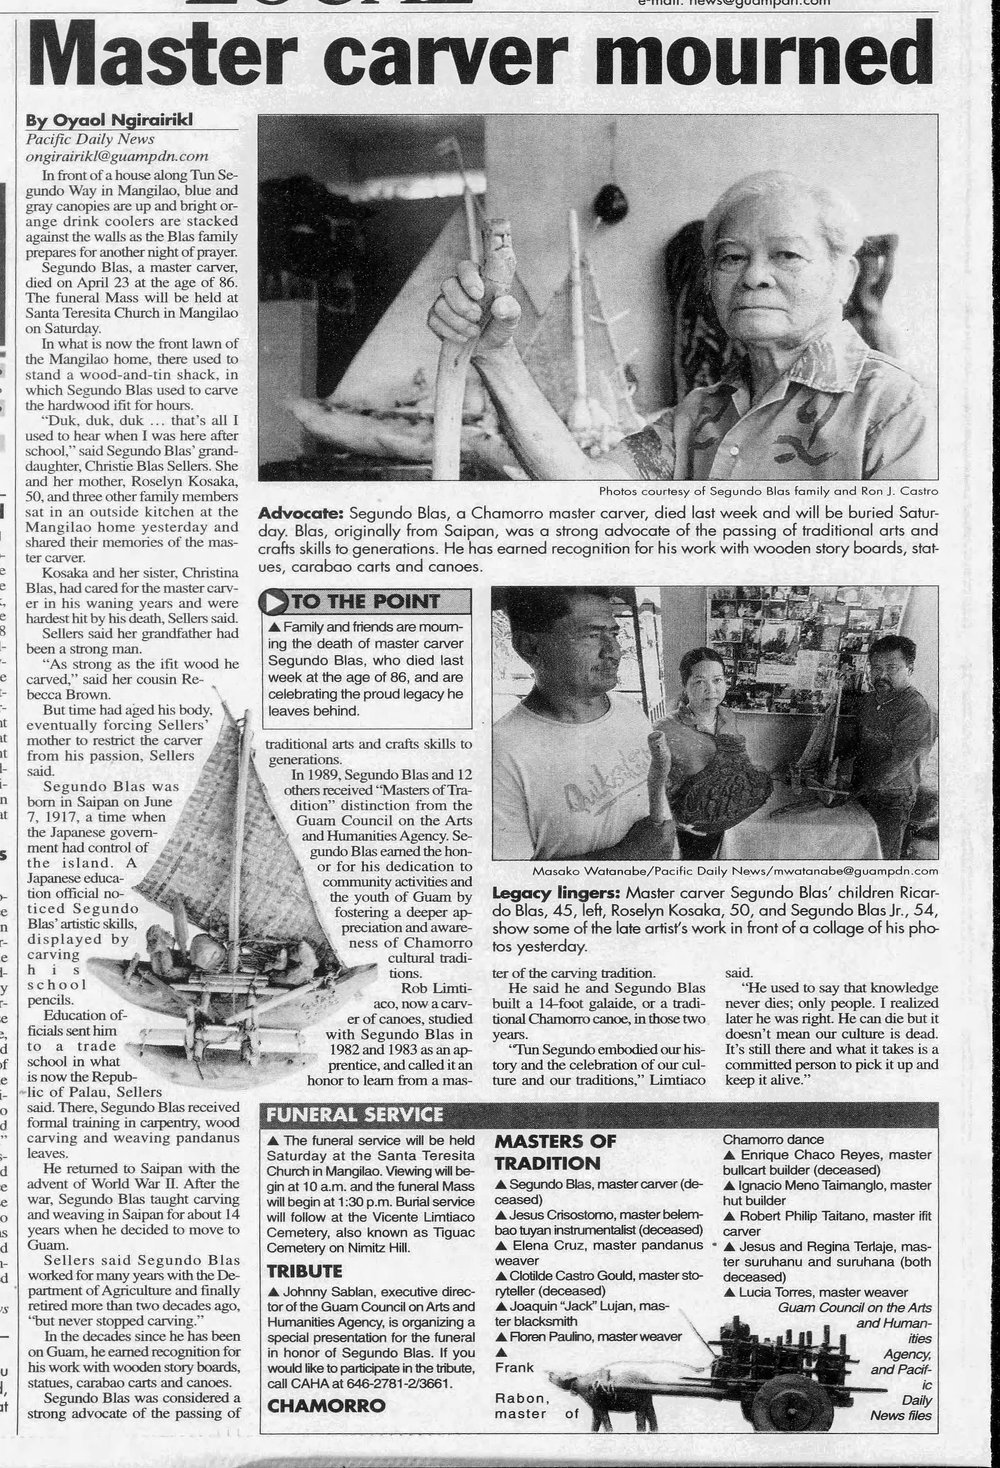  Pacific Daily News_April 27, 2004_Pg.2 